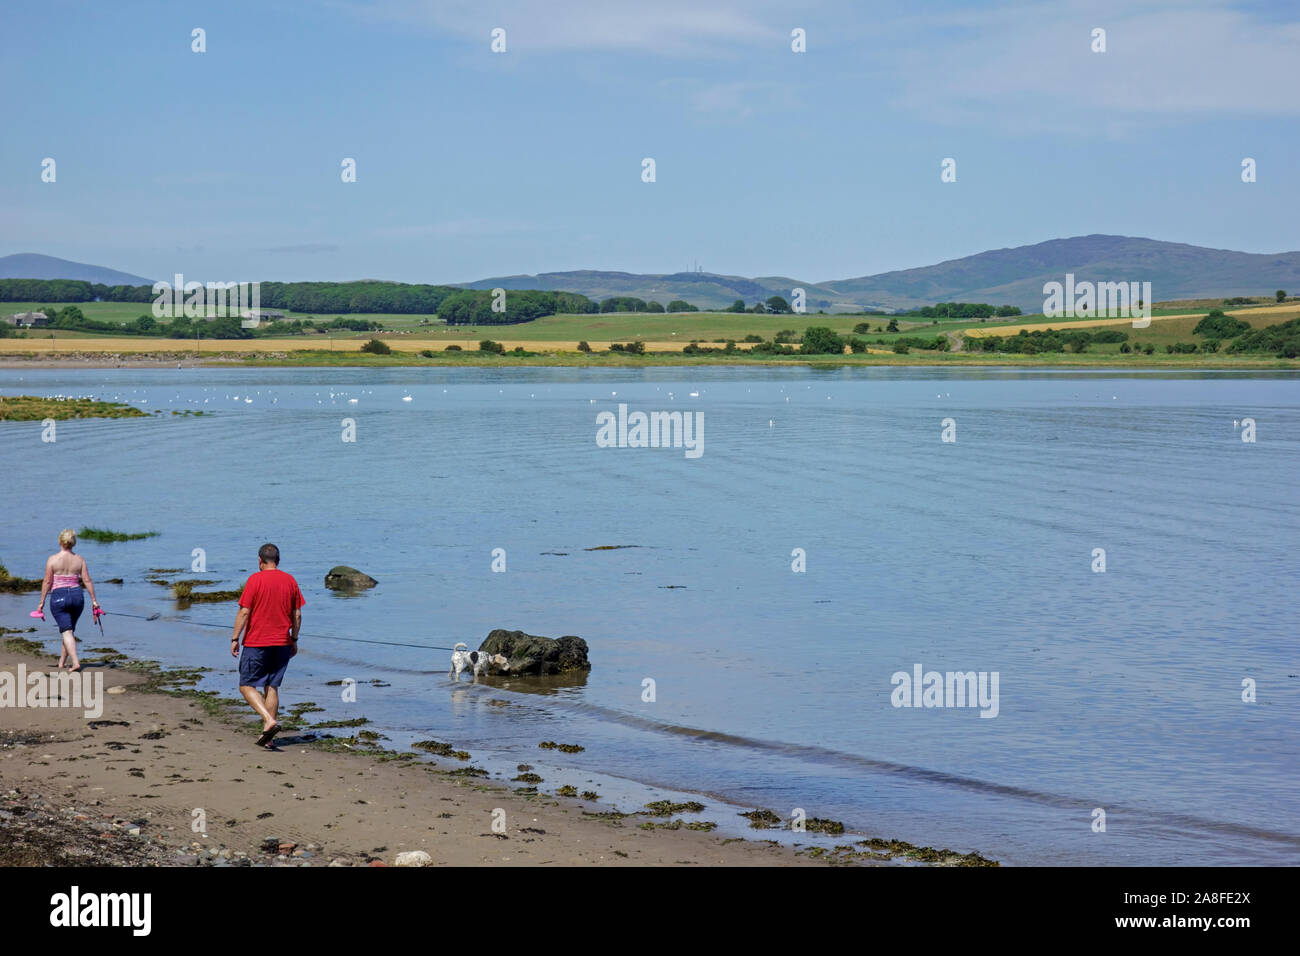 People walking on the beach at Garlieston in Wigtownshire,  Dumfries and Galloway,  Scotland,  UK. Stock Photo